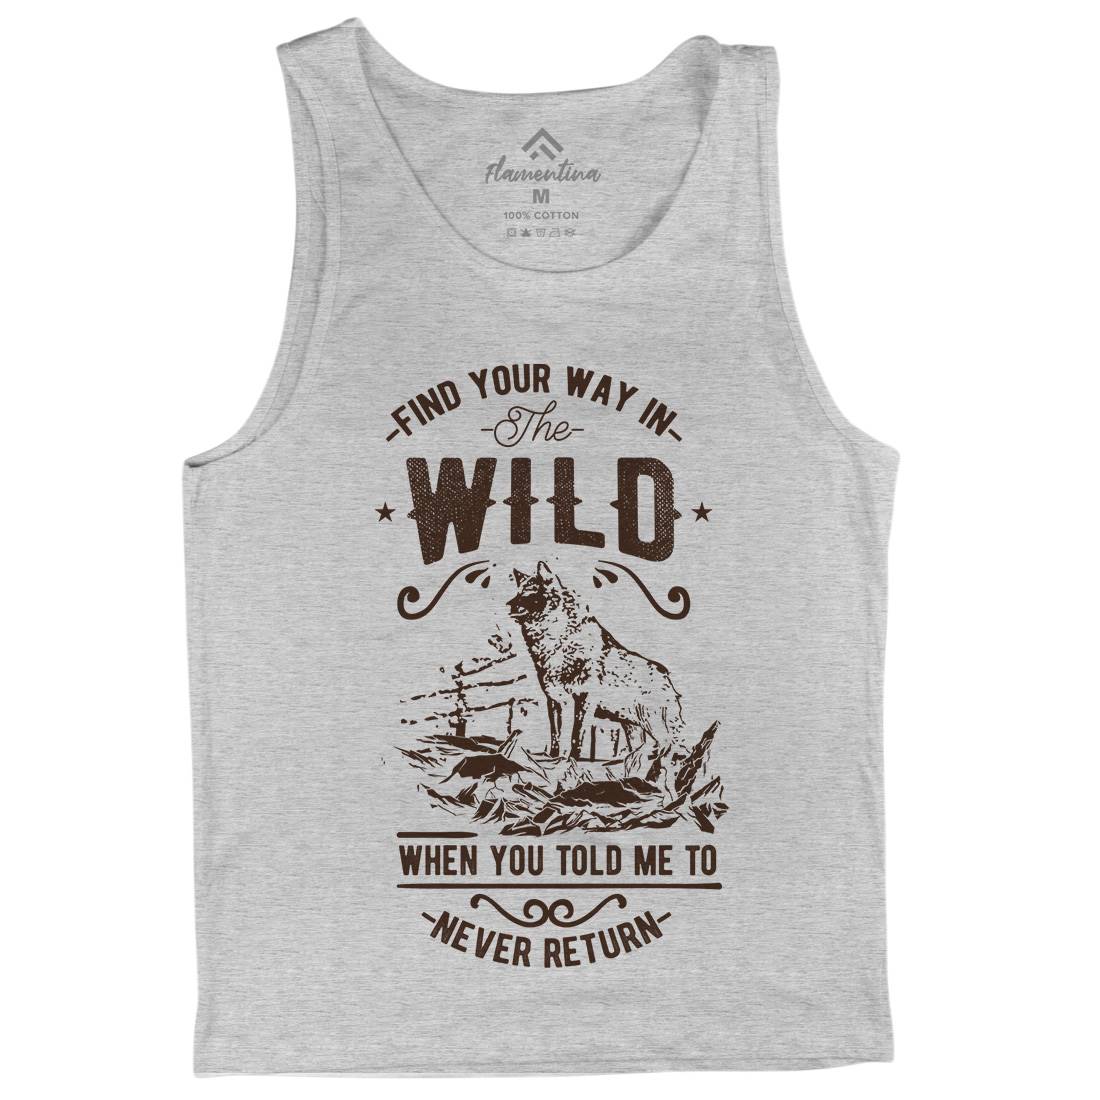 Find Your Way In The Wild Mens Tank Top Vest Nature C932